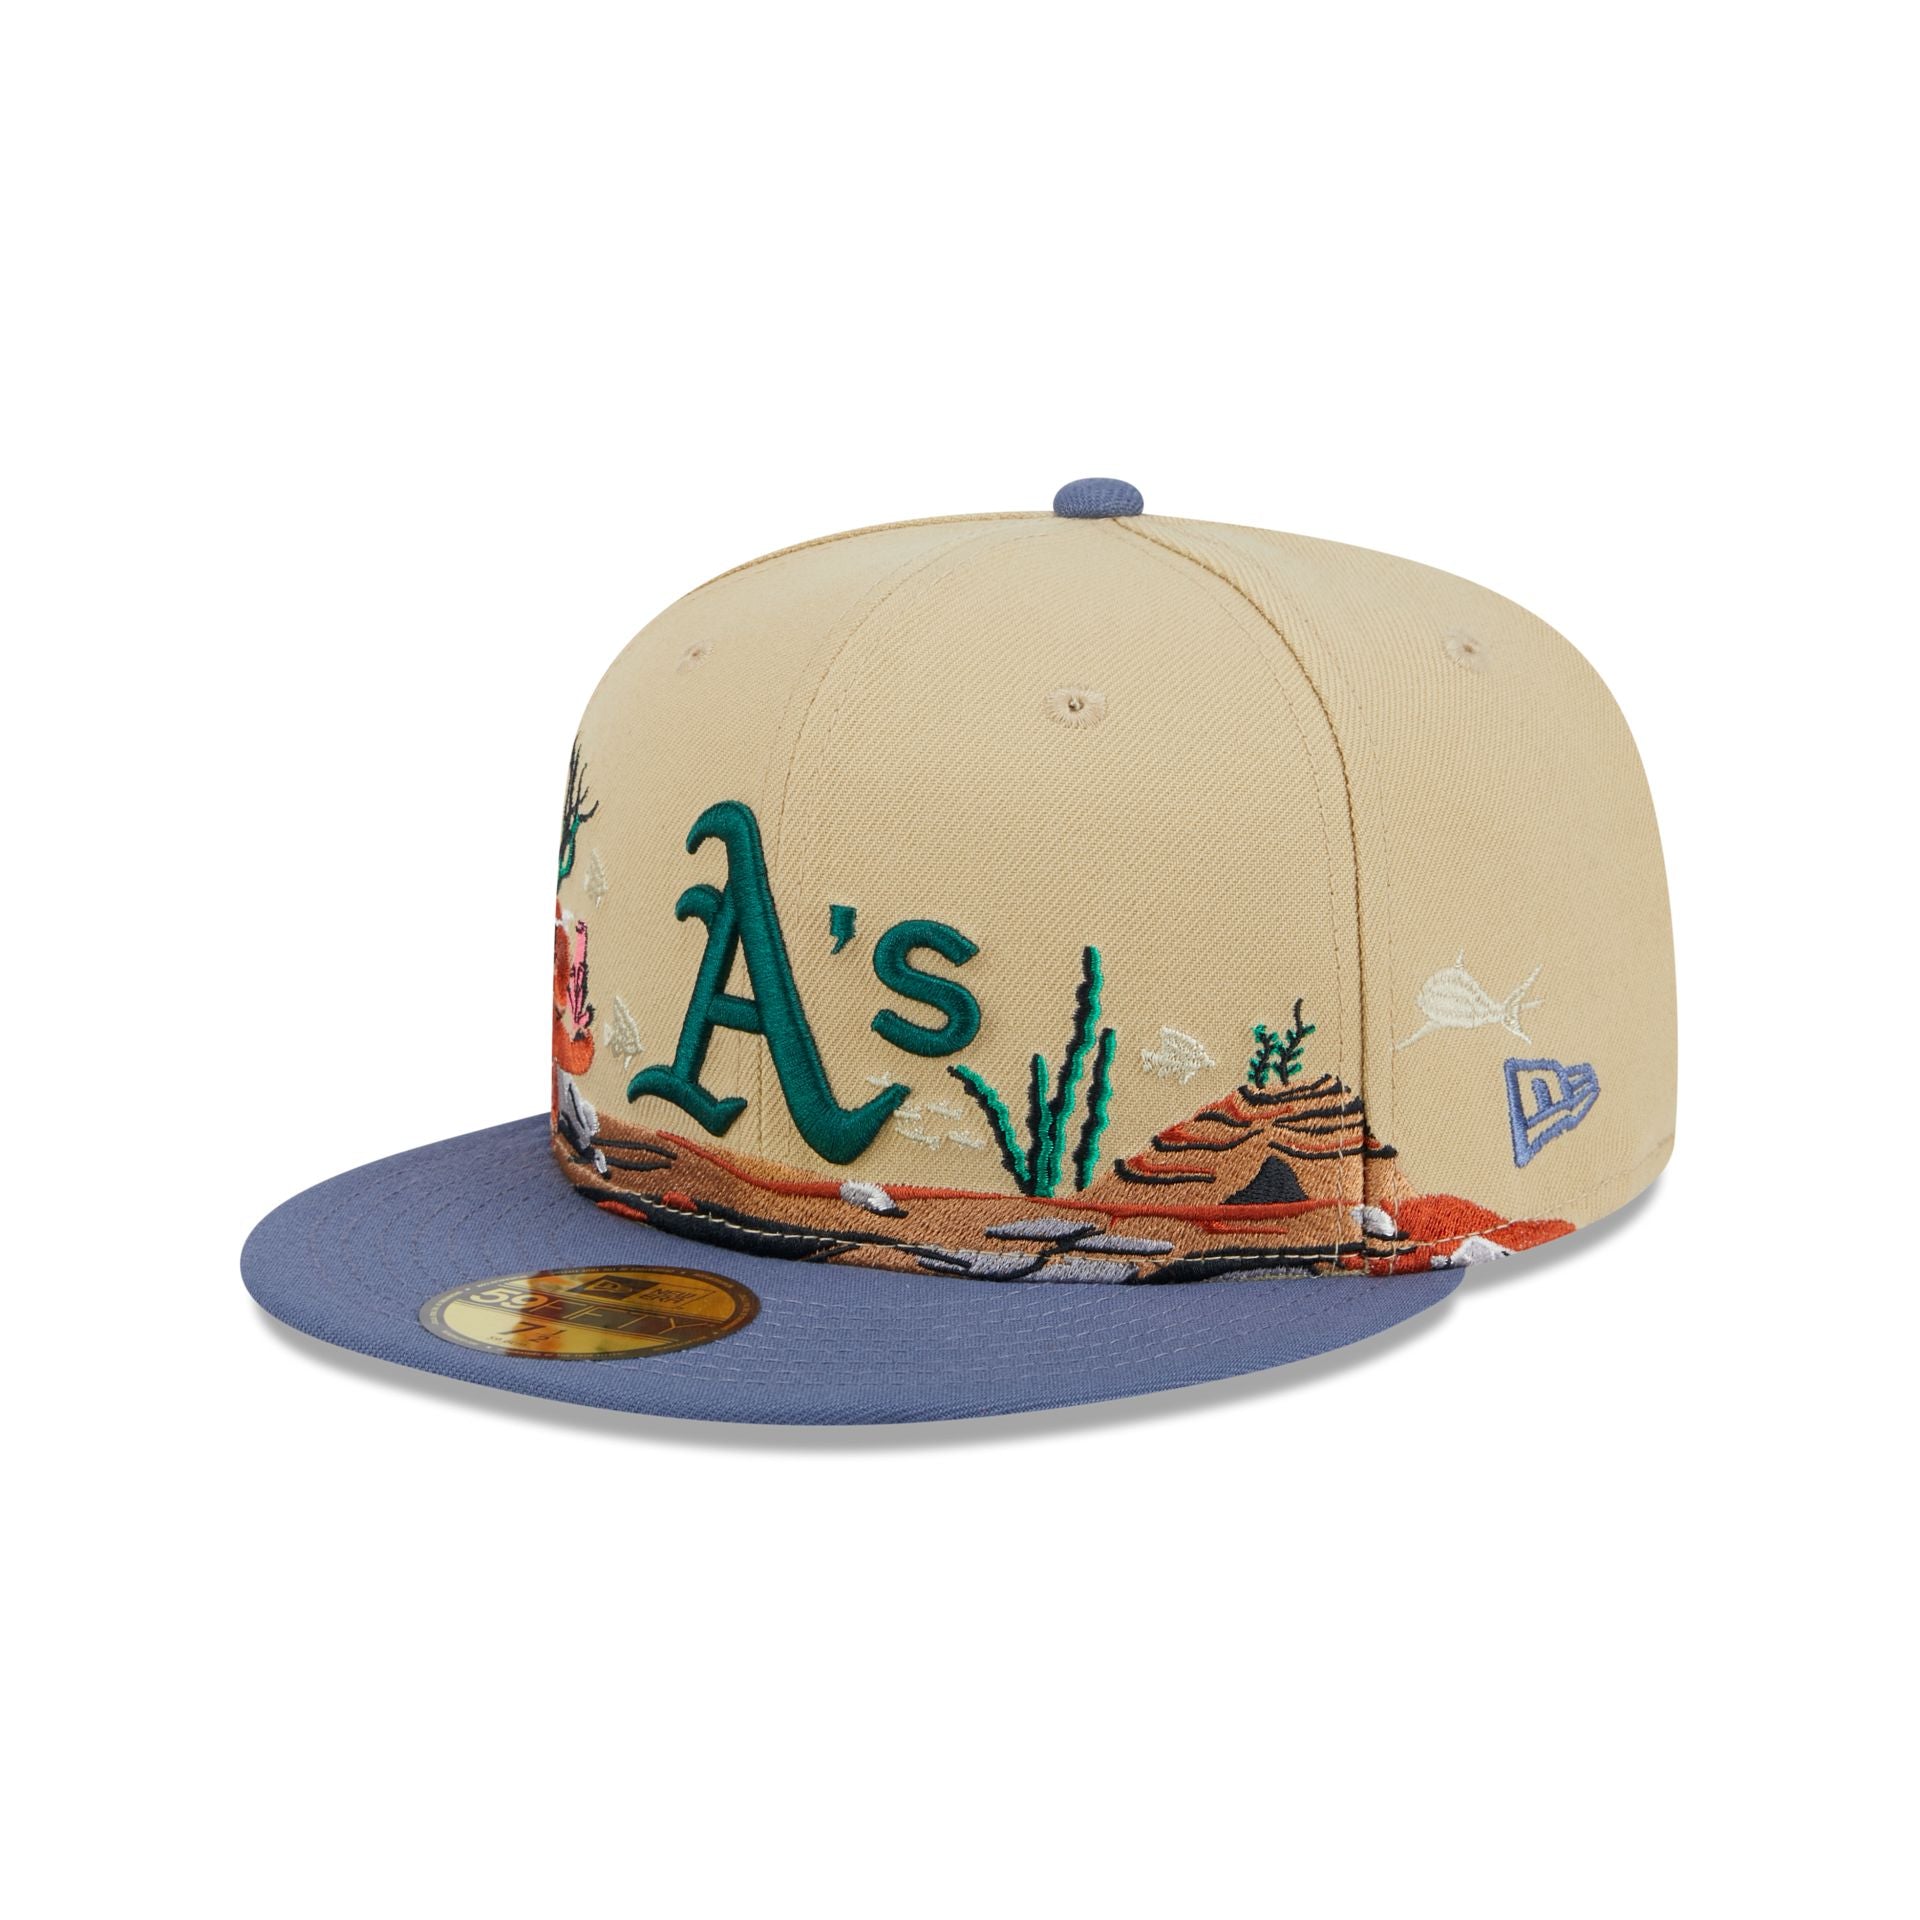 Blue/Red. Stars under Bill Oakland A's Athletics Fitted Hat 8 New Era  59Fifty 8